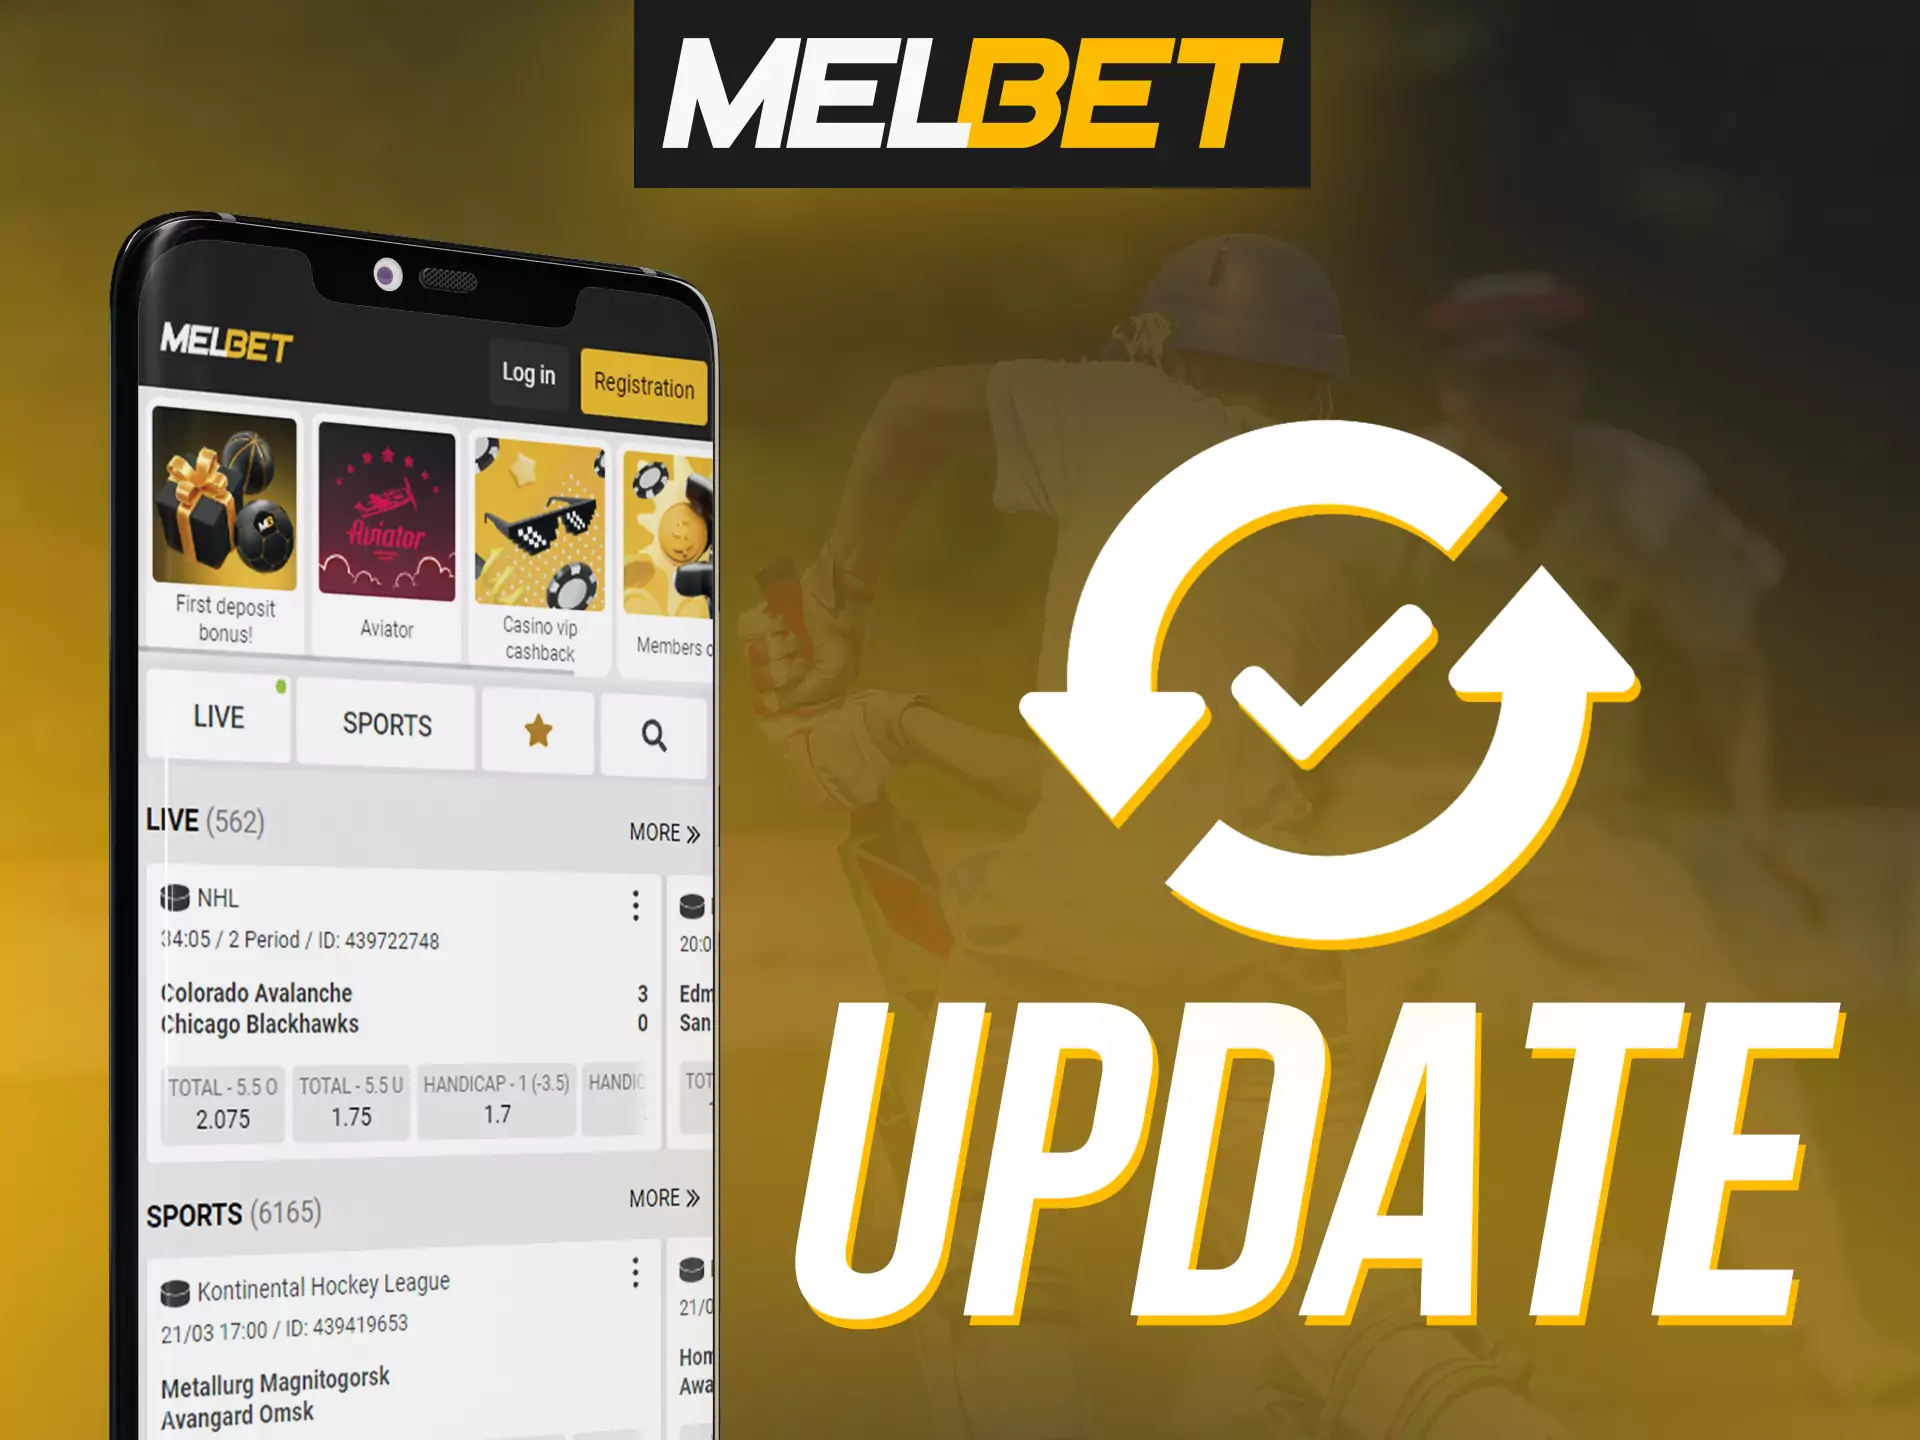 Be sure to update your Melbet app.